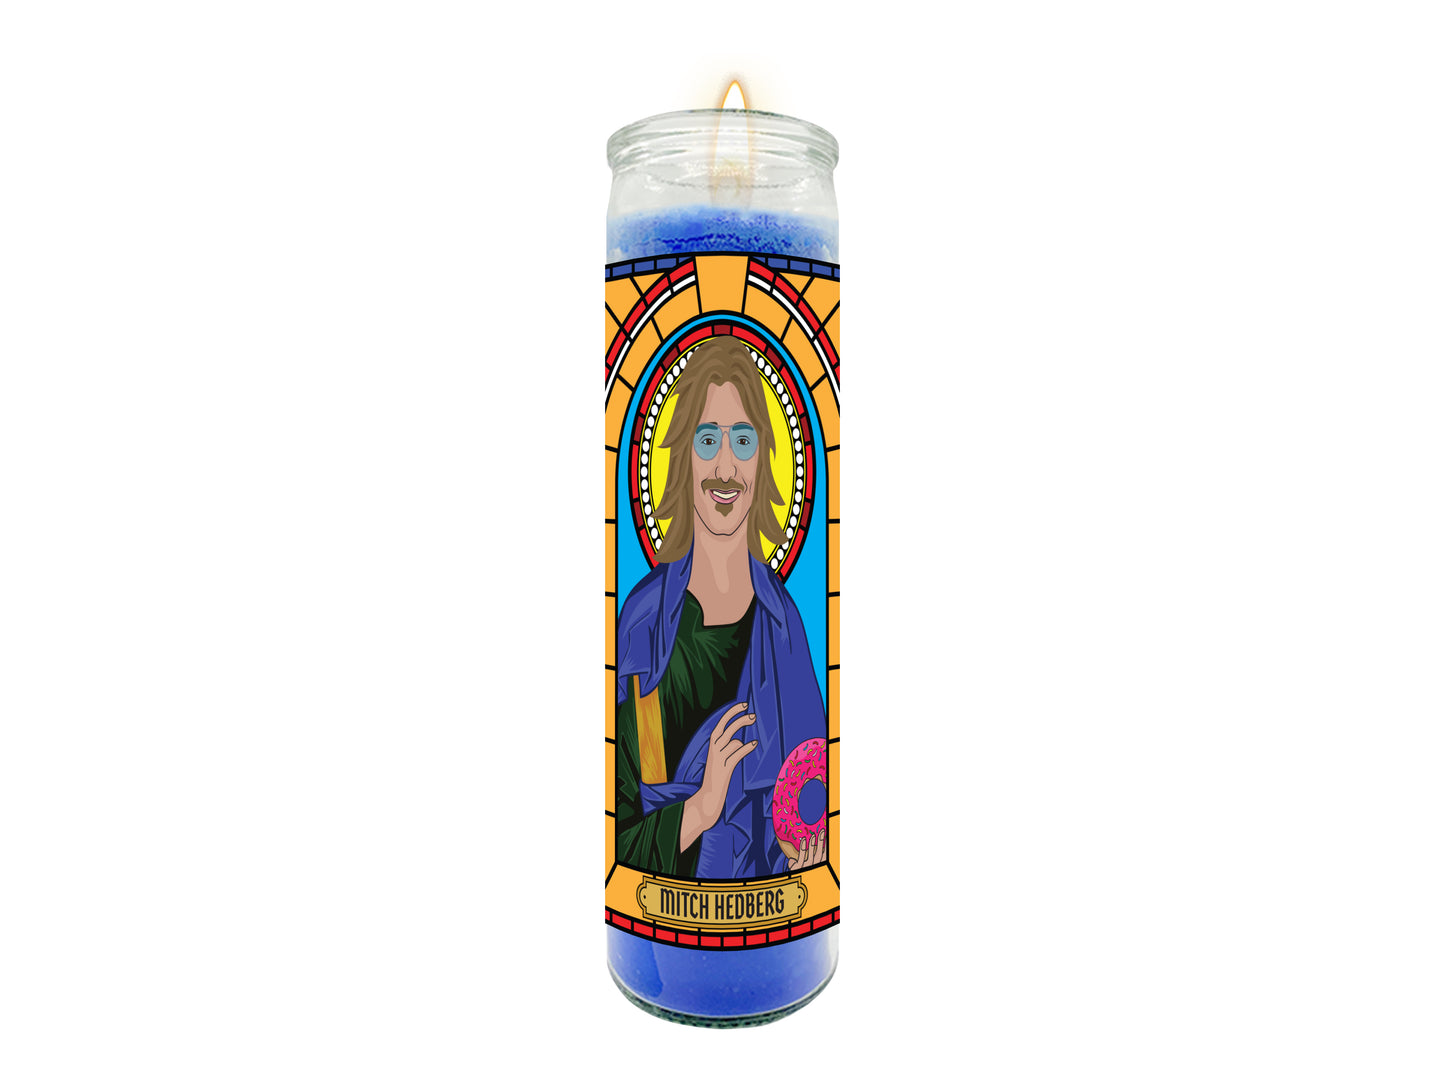 Mitch Hedberg Illustrated Prayer Candle